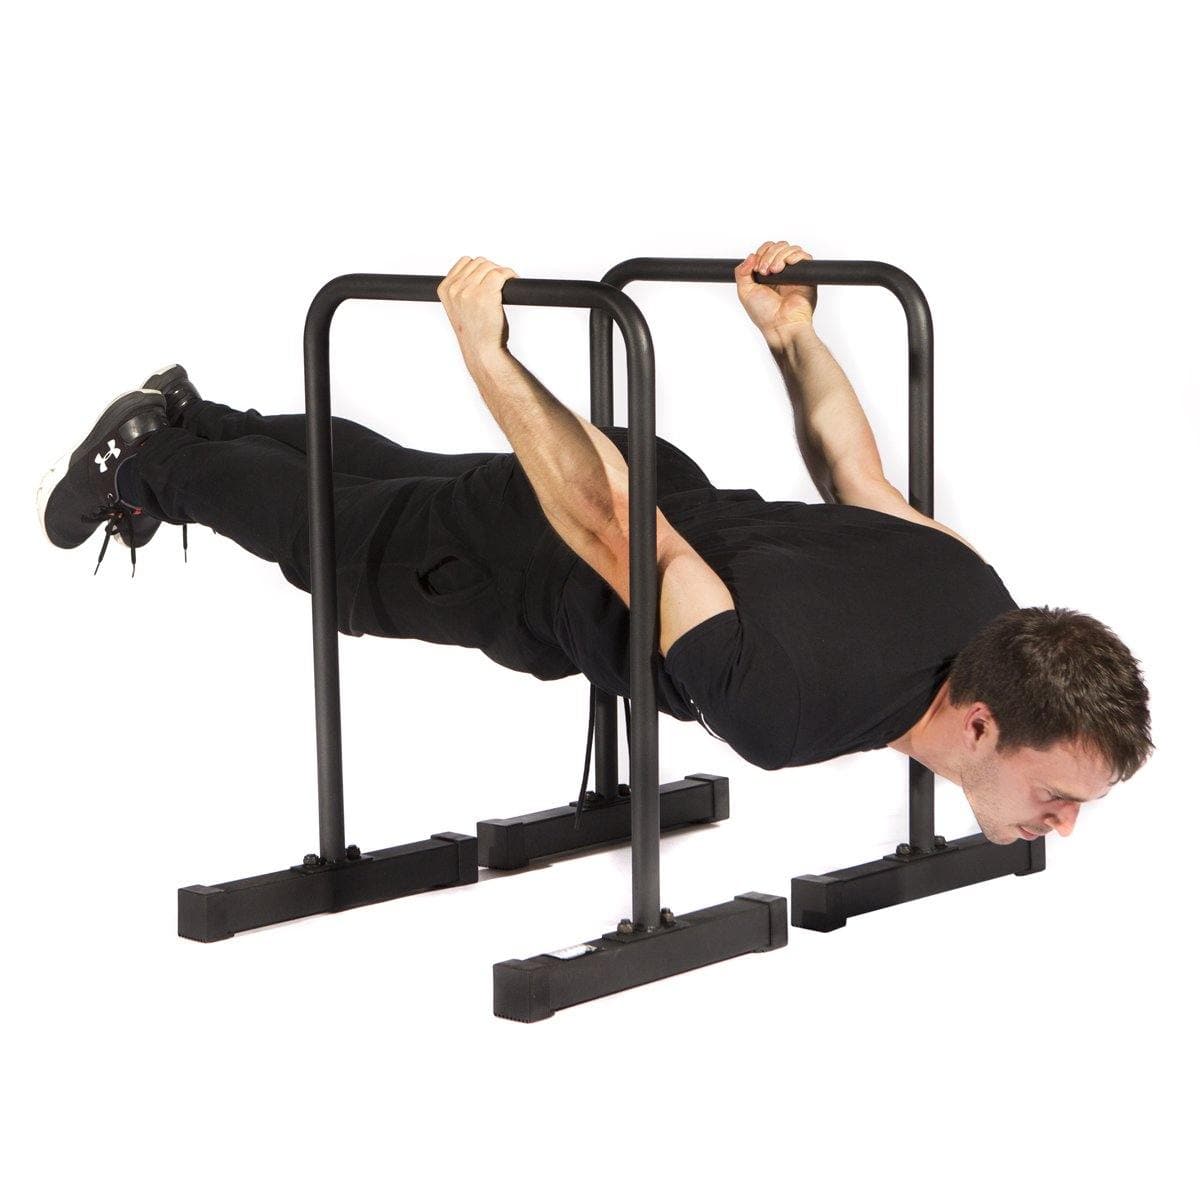 HIGH PARALLETTE STAND - PARALLEL BARS - Musclemania Fitness MegaStore